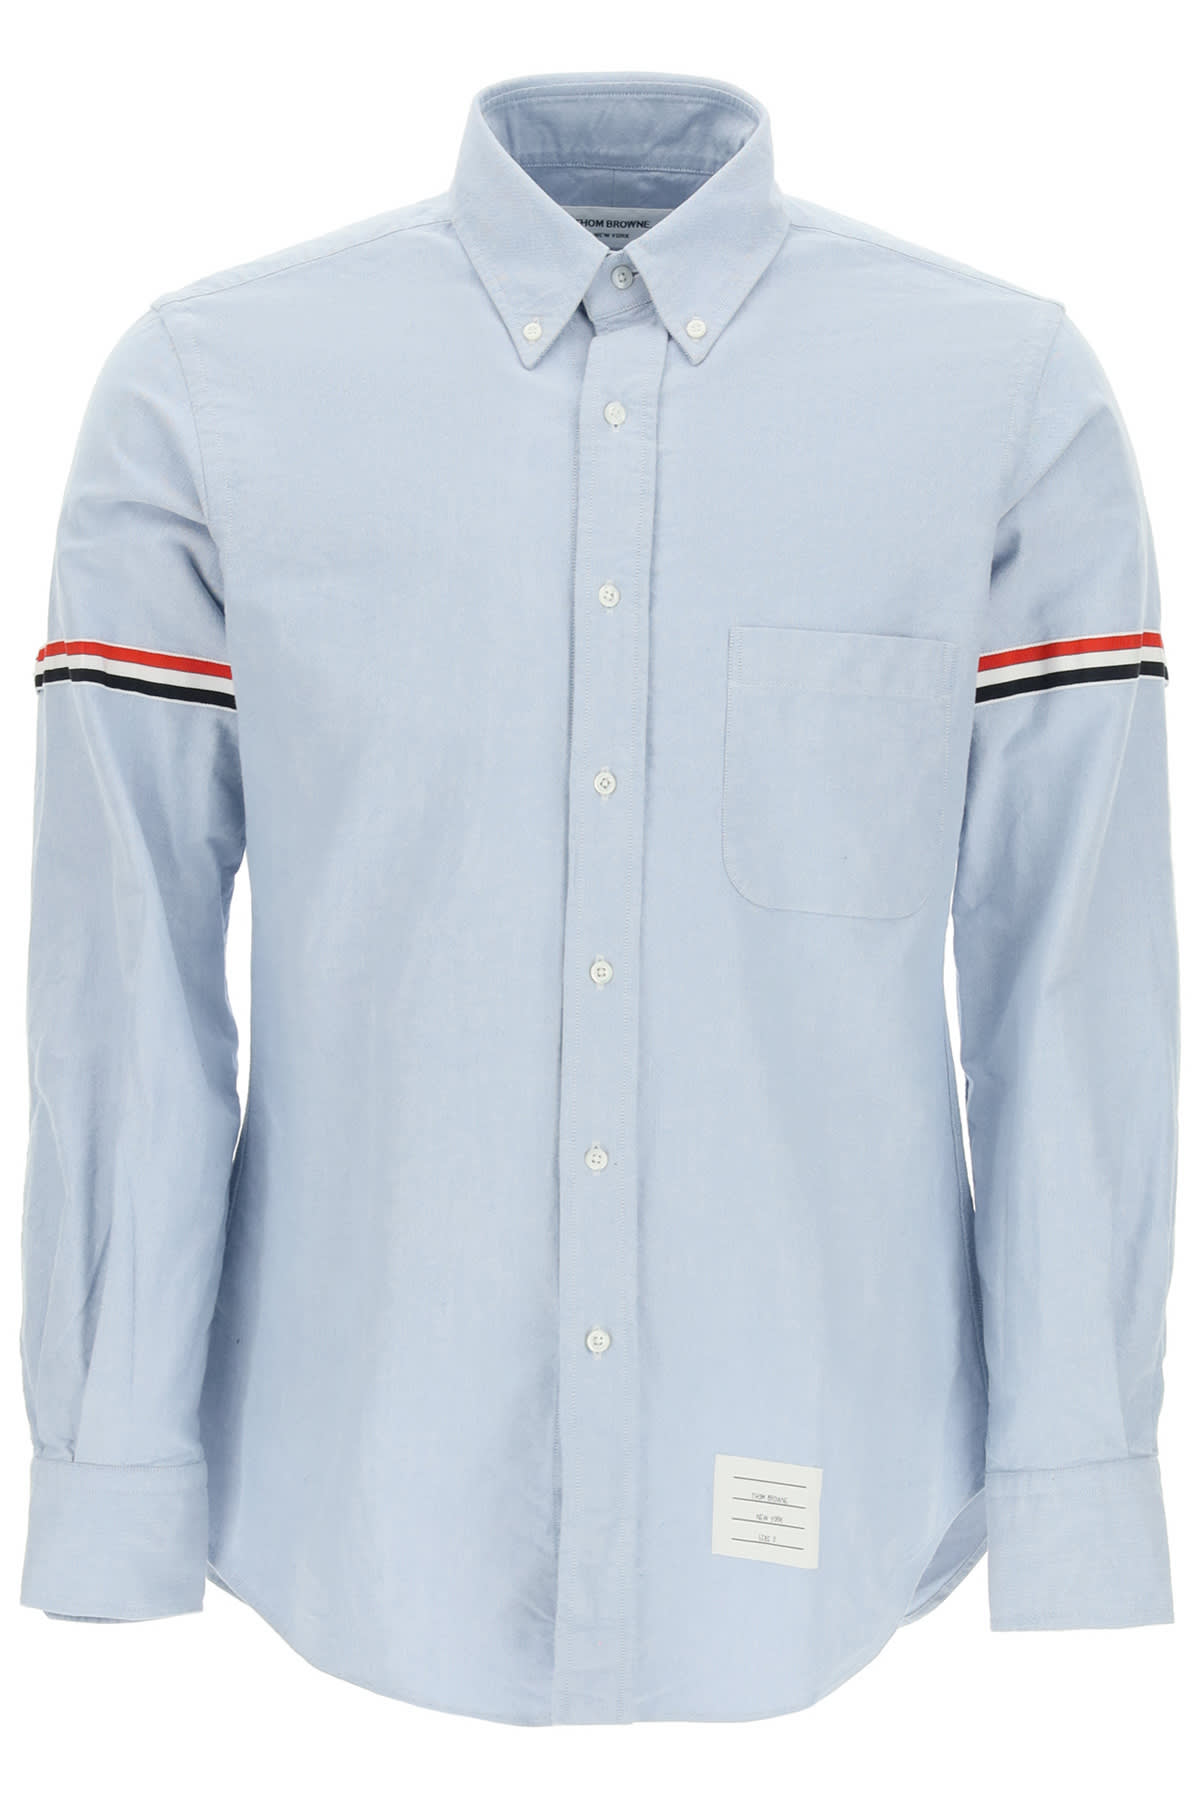 Thom Browne Shirt With Tricolor Ribbon